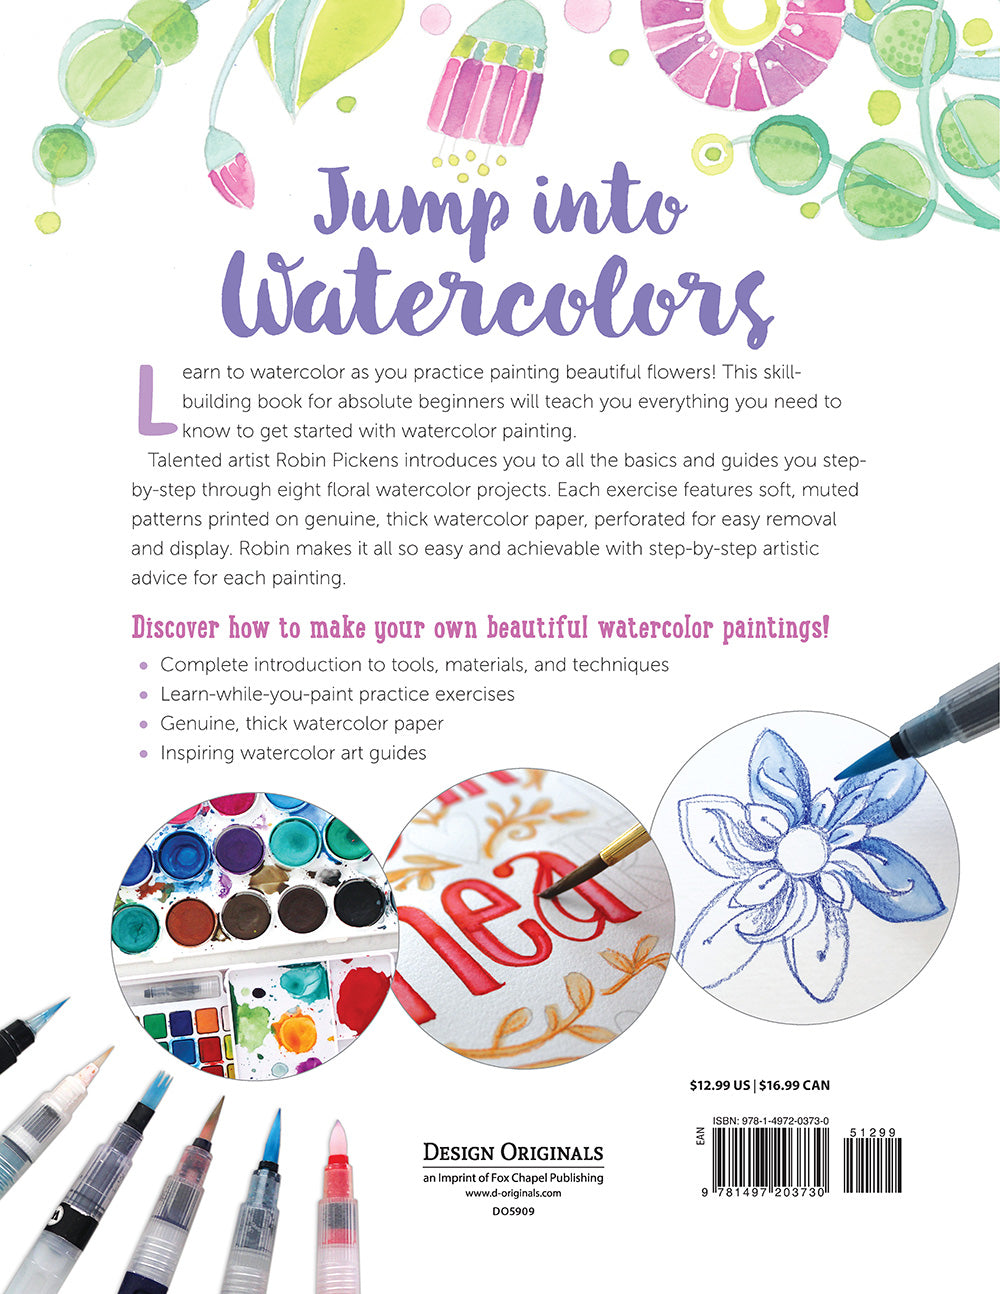 Just Add Watercolor Flowers